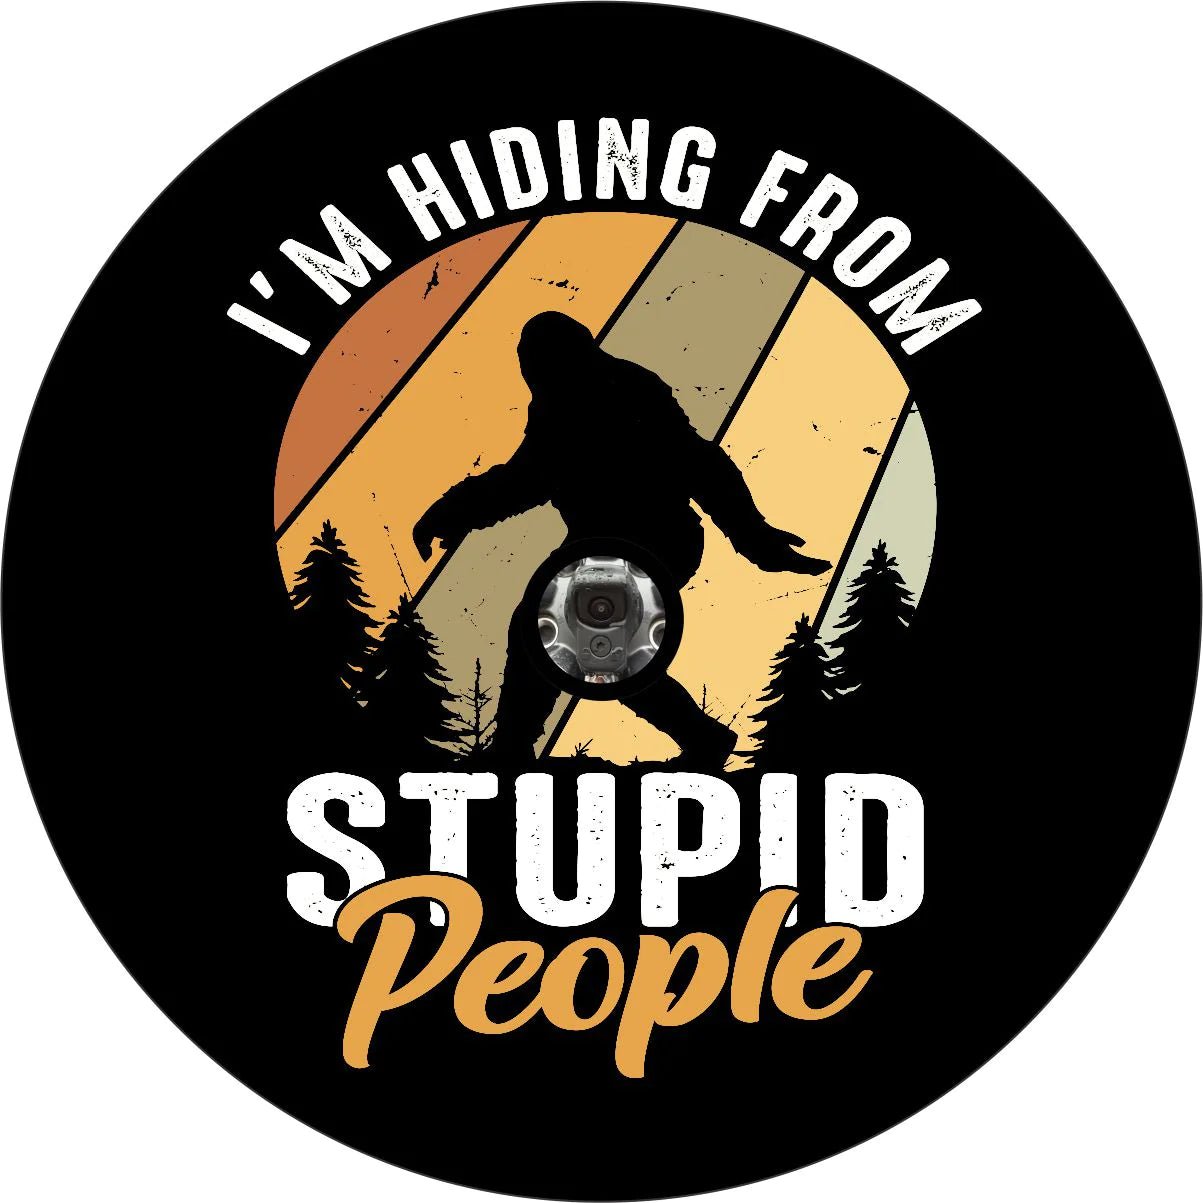 I'm Hiding from Stupid People Bigfoot Spare Tire Cover - Goats Trail